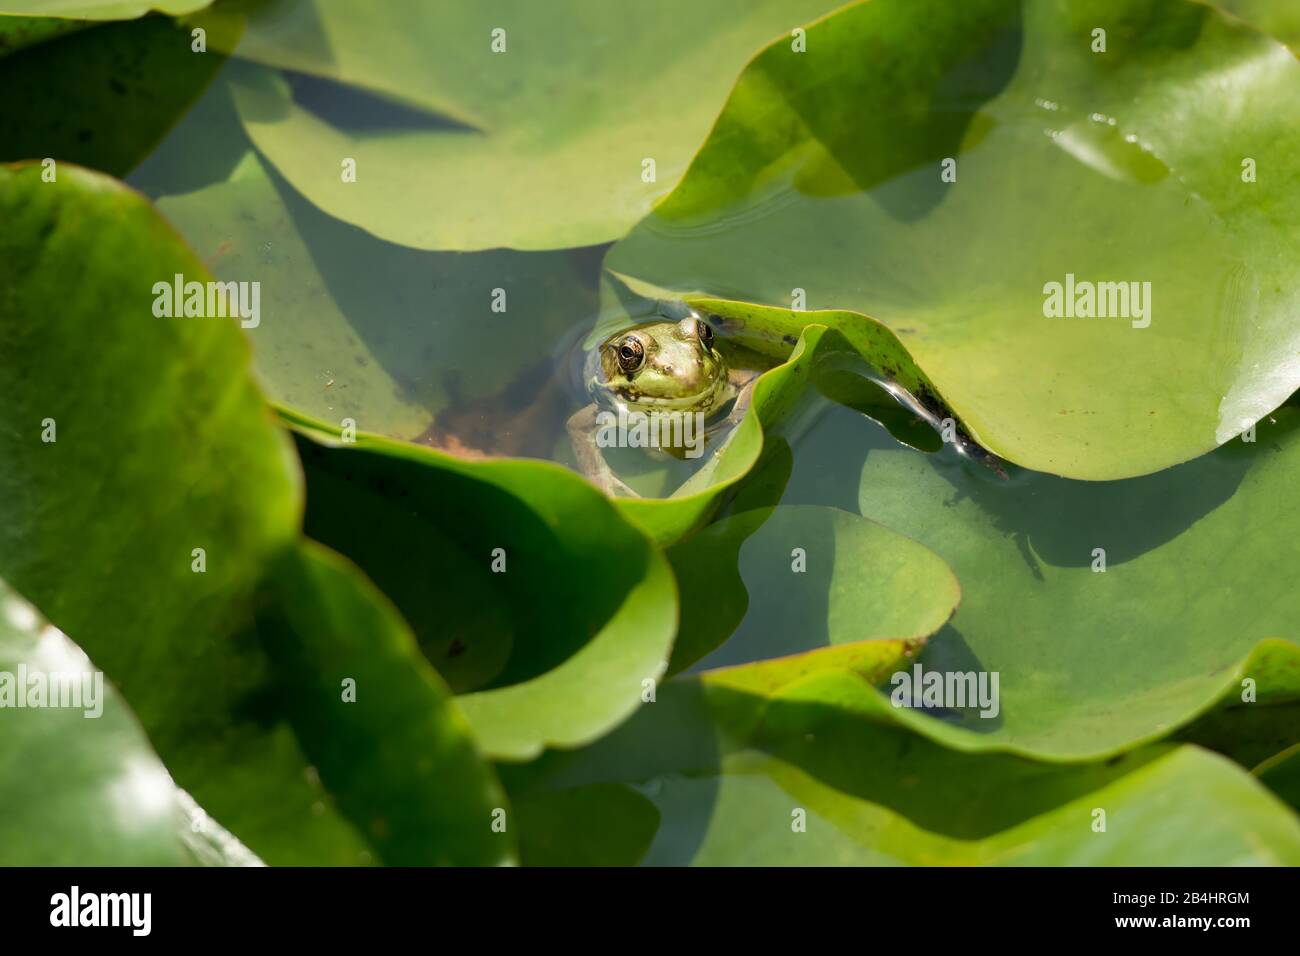 Cute, little frog hiding in the middle of lily pads in a pond in New Jersey, peeking out with huge eyes. Stock Photo